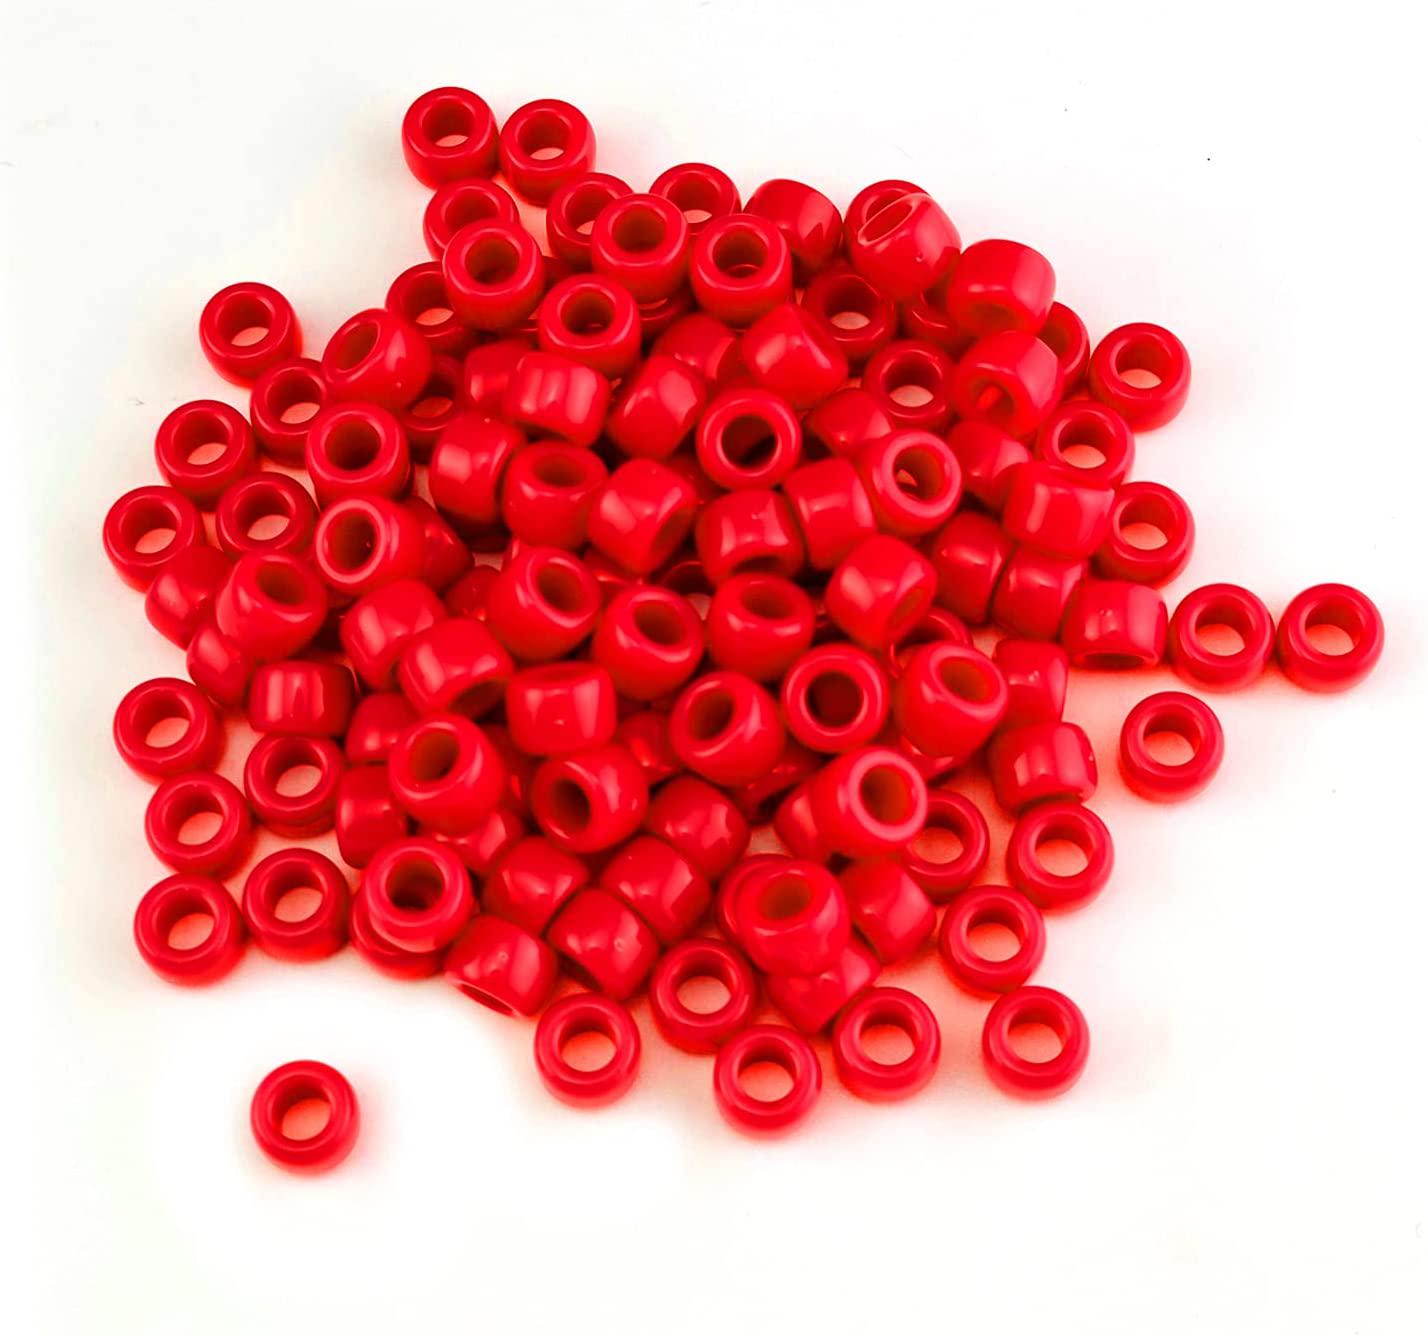 mayared, MayaRed Acrylic, 9mm, Opaque Color, Pony Beads, 300 PCs Multicolor (Red)